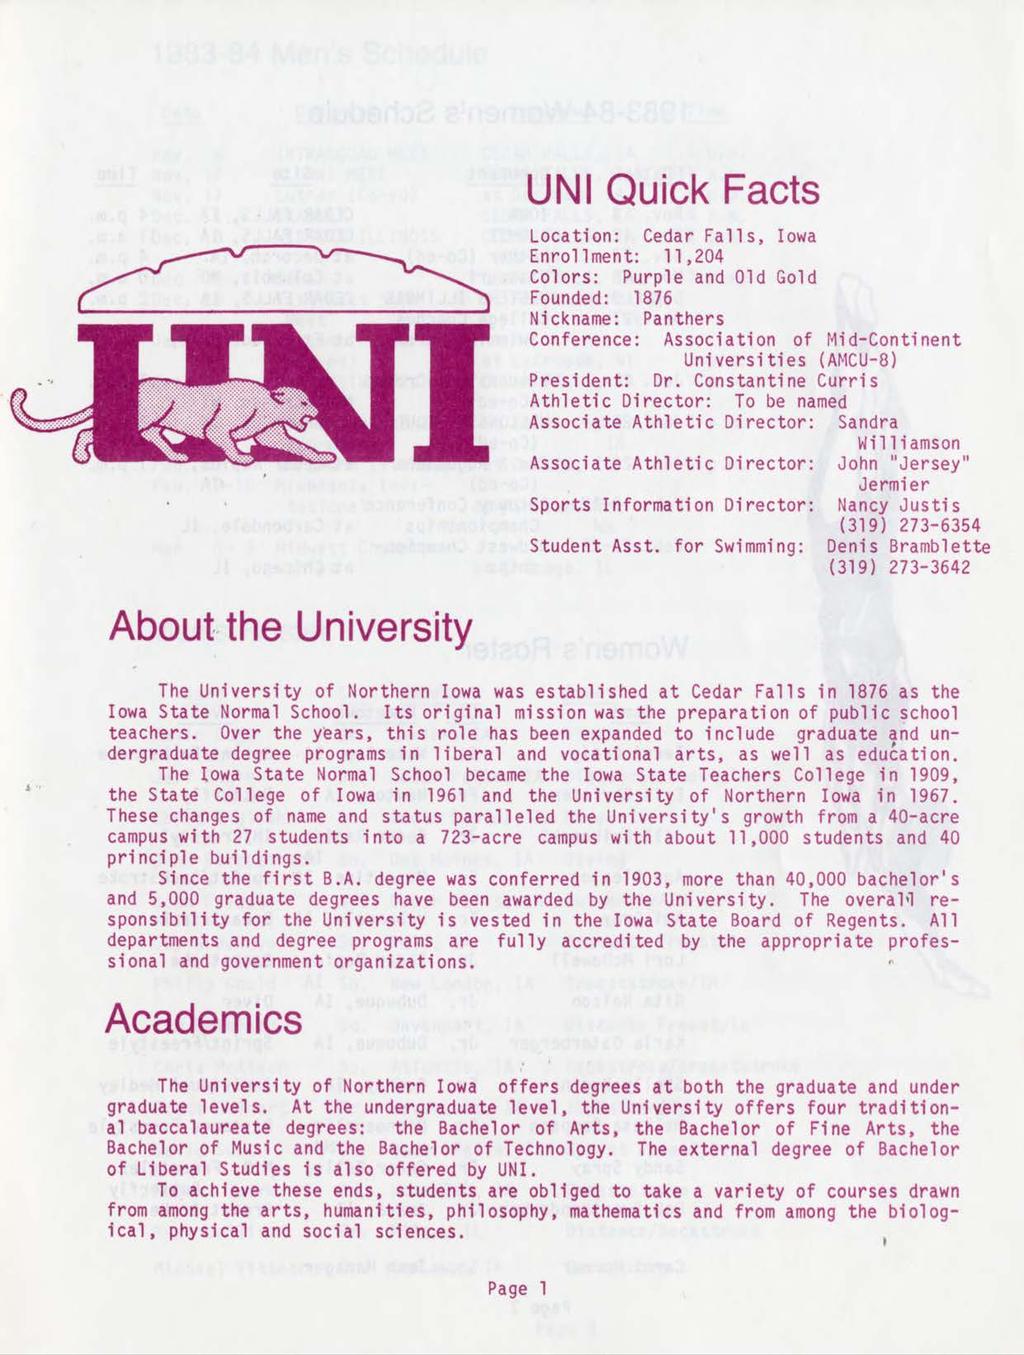 UNI Quick Facts Location: Cedar Falls, Iowa Enrollment: 11,204 Colors: Purple and Old Gold Founded: 1876 Nickname: Panthers Conference: Association of Mid-Continent Universities (AMCU-8) President: